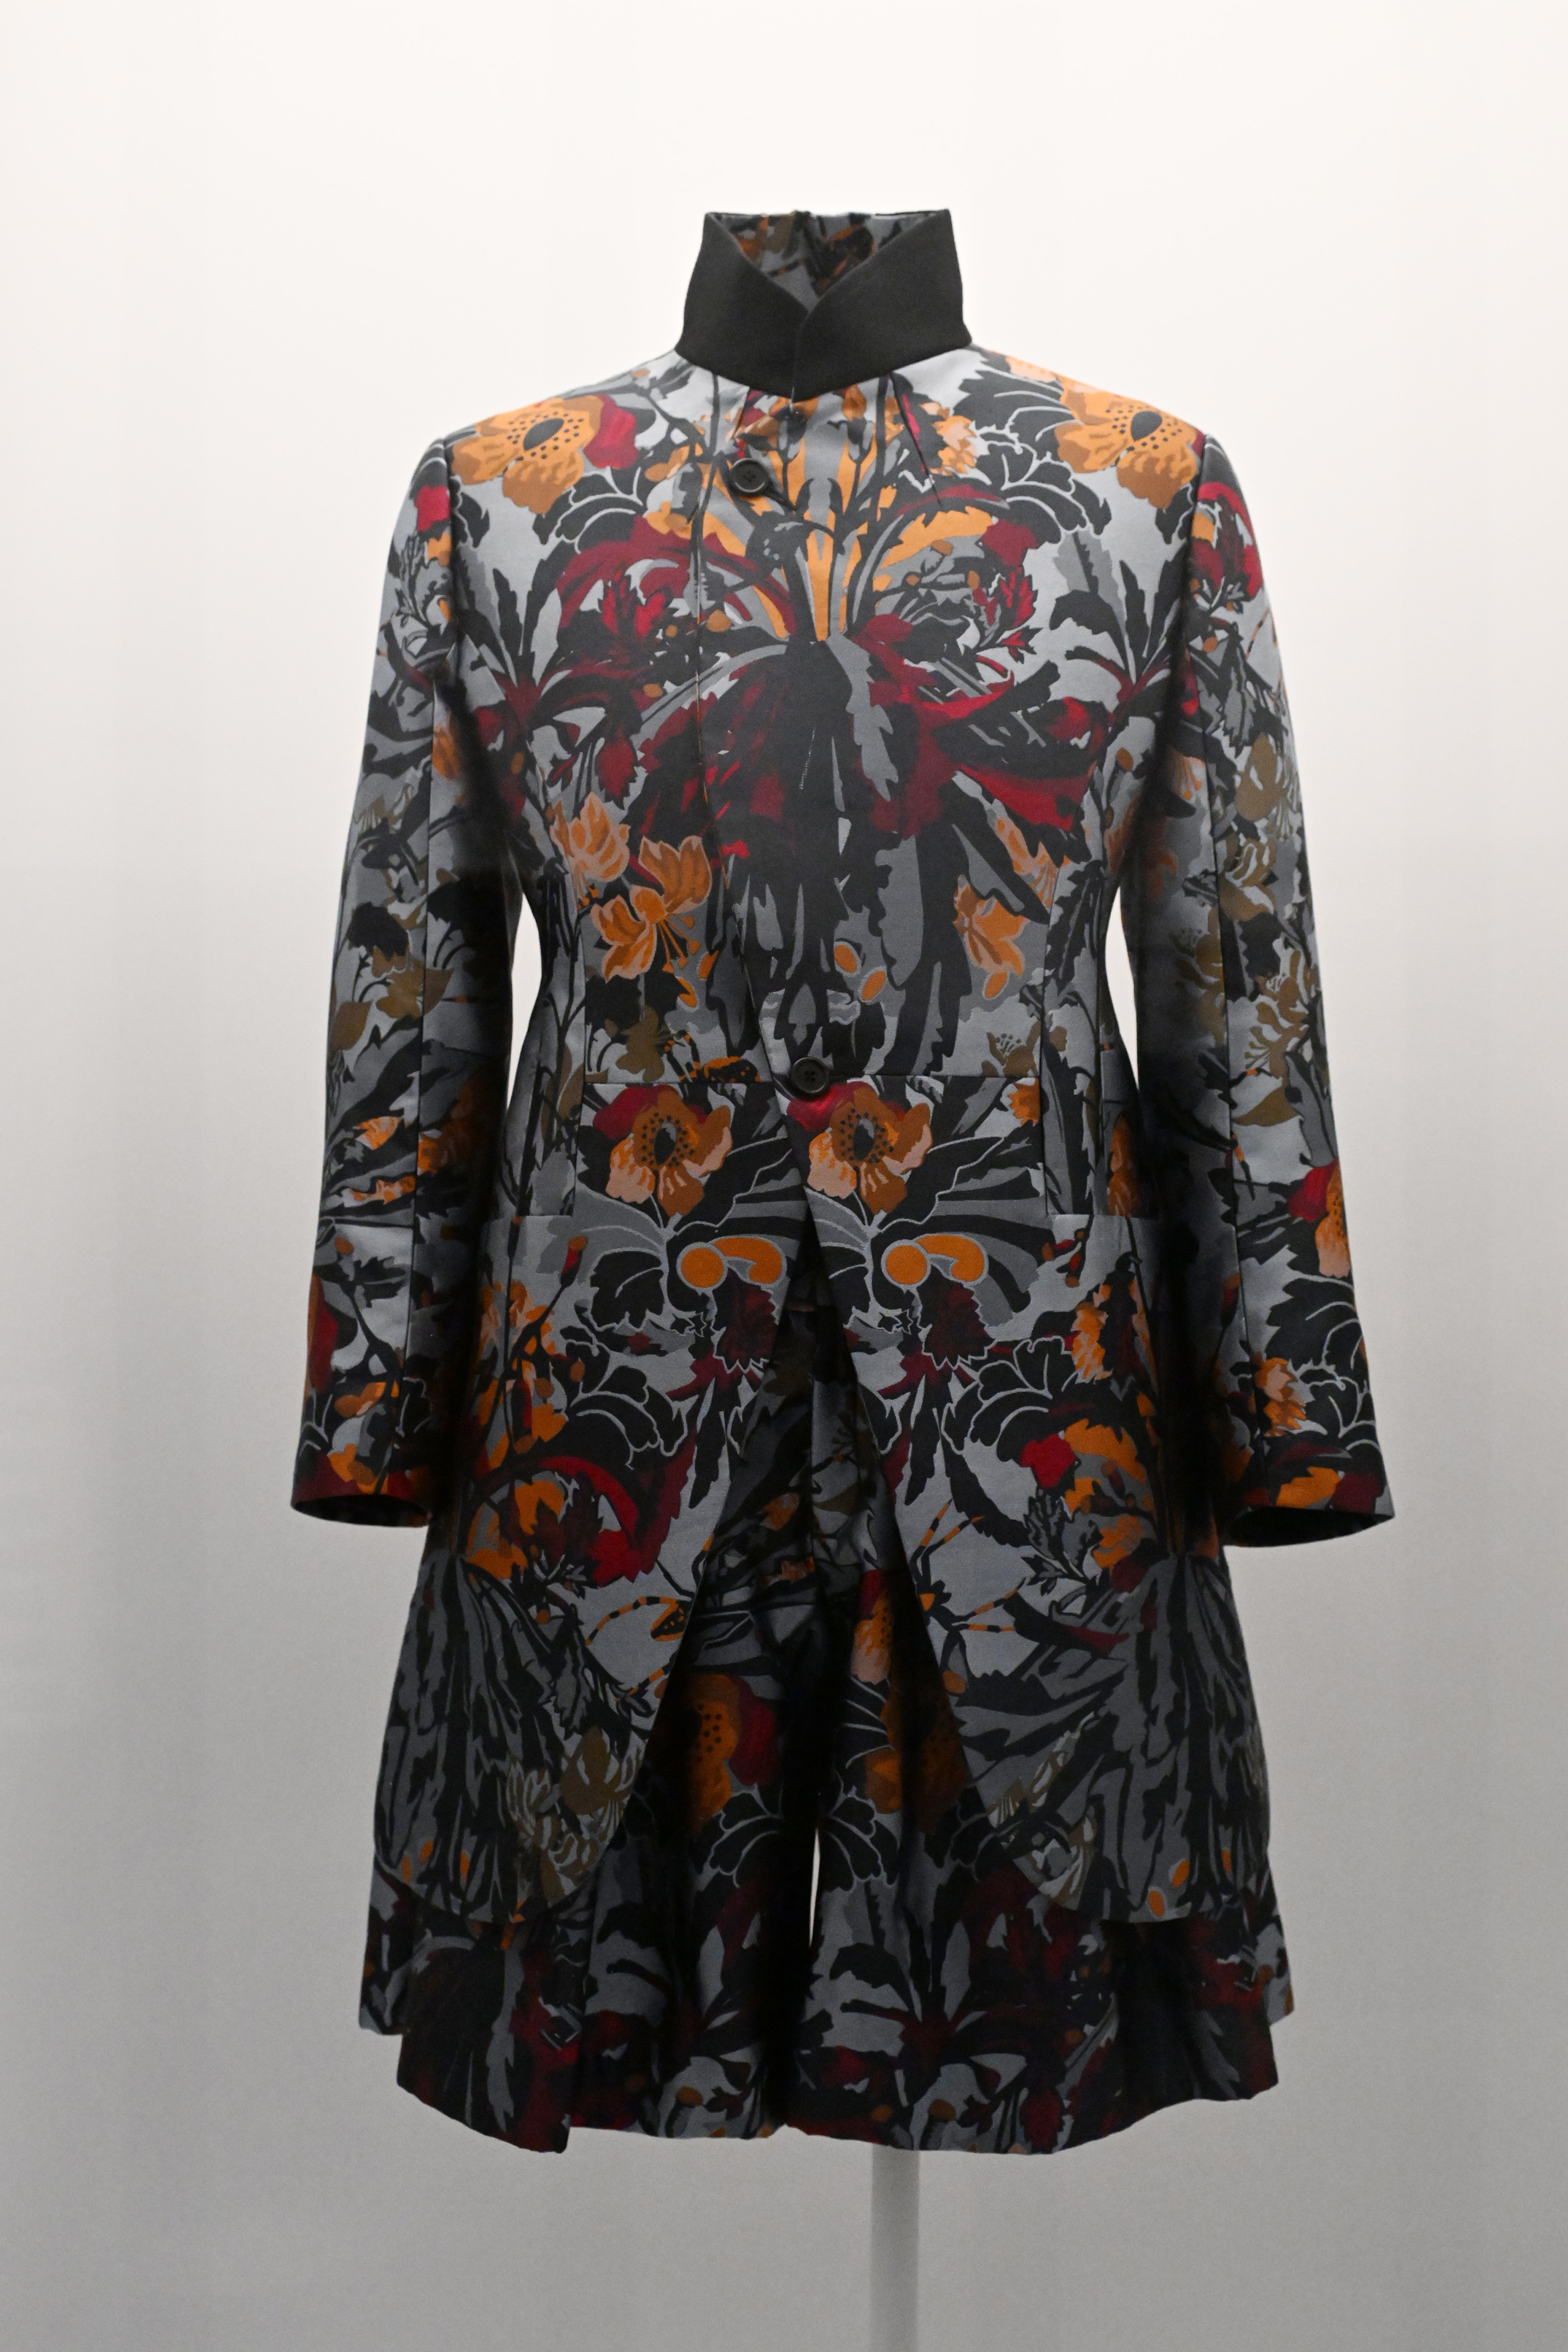 A patterned coat with a floral design on display